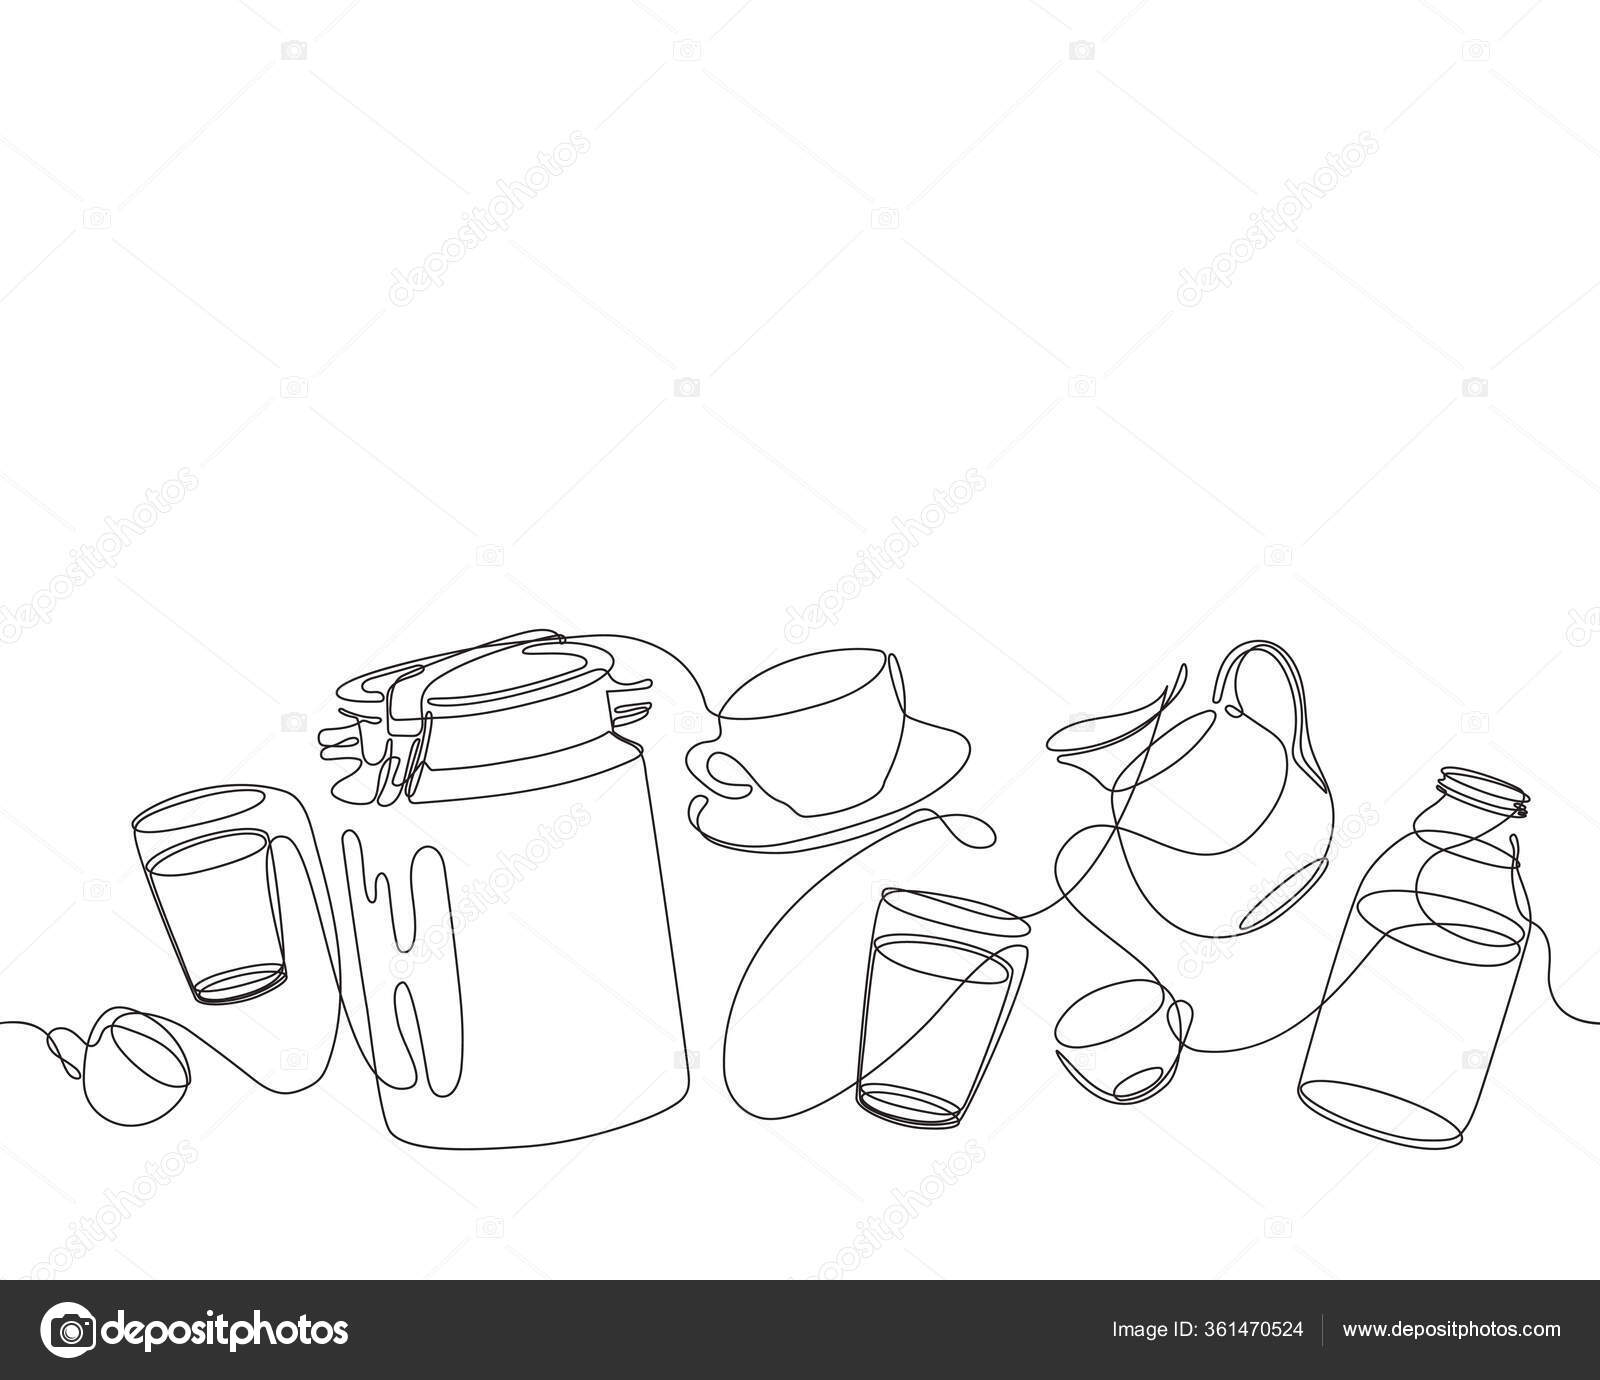 Milk can, jug, glass and bottle. Kitchen pattern. Cooking. One line